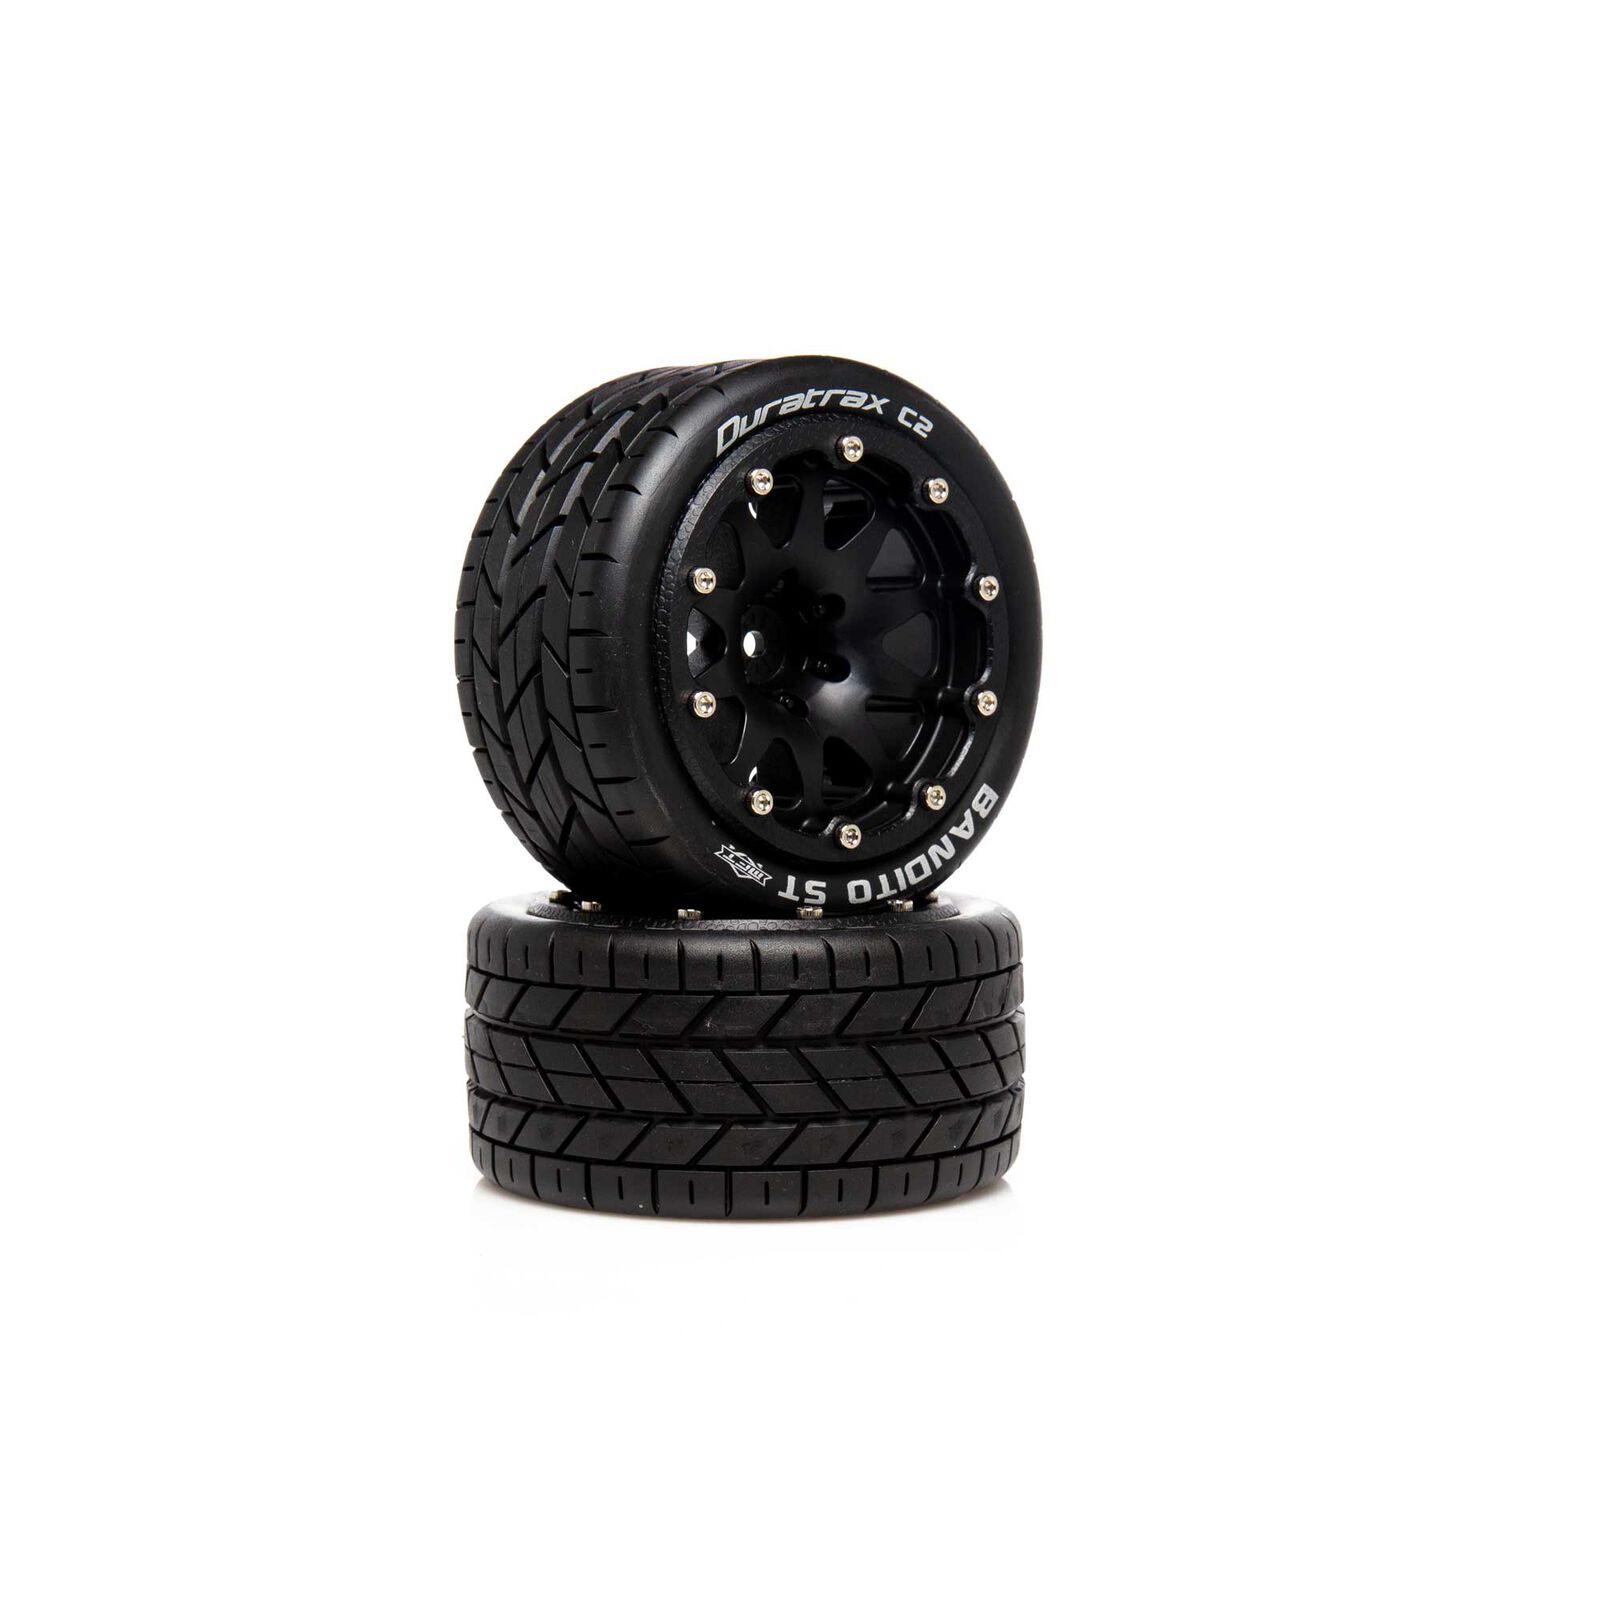 Bandito ST Belted 2.8" 2WD Mounted Rear Tires, .5 Offset, Black (2)